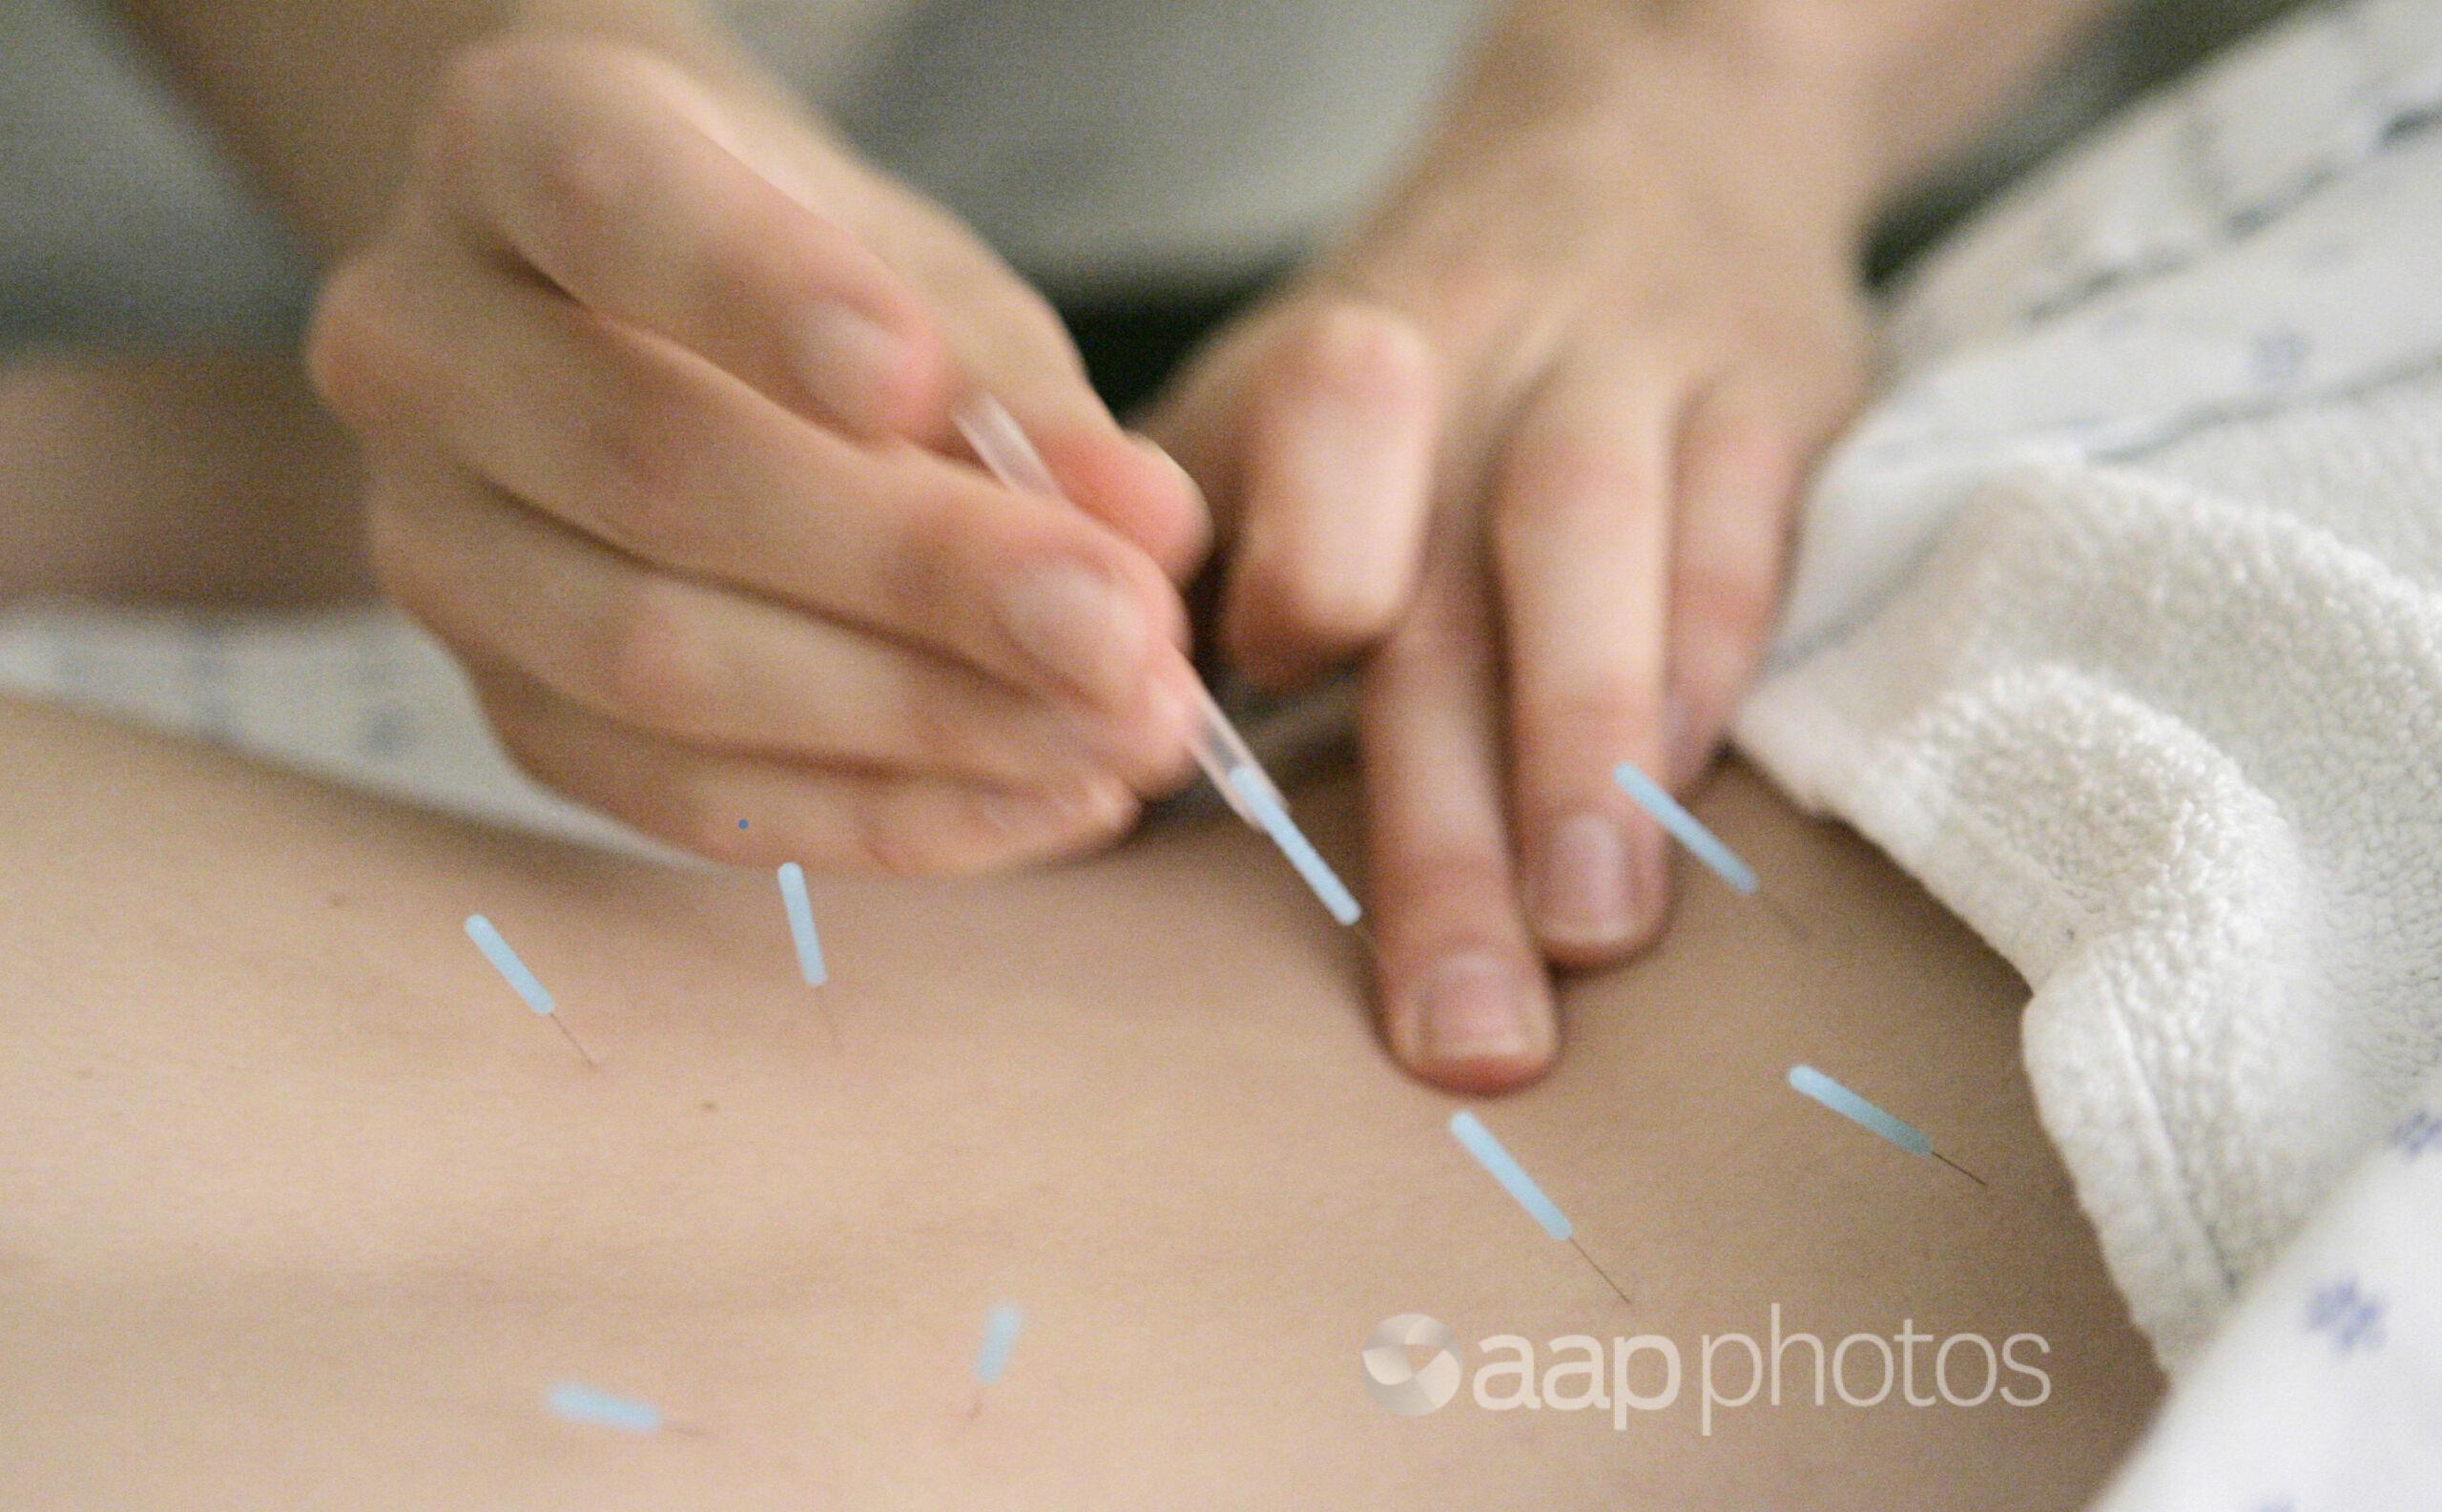 Acupuncture needles in the muscles near the spine to relieve back pain